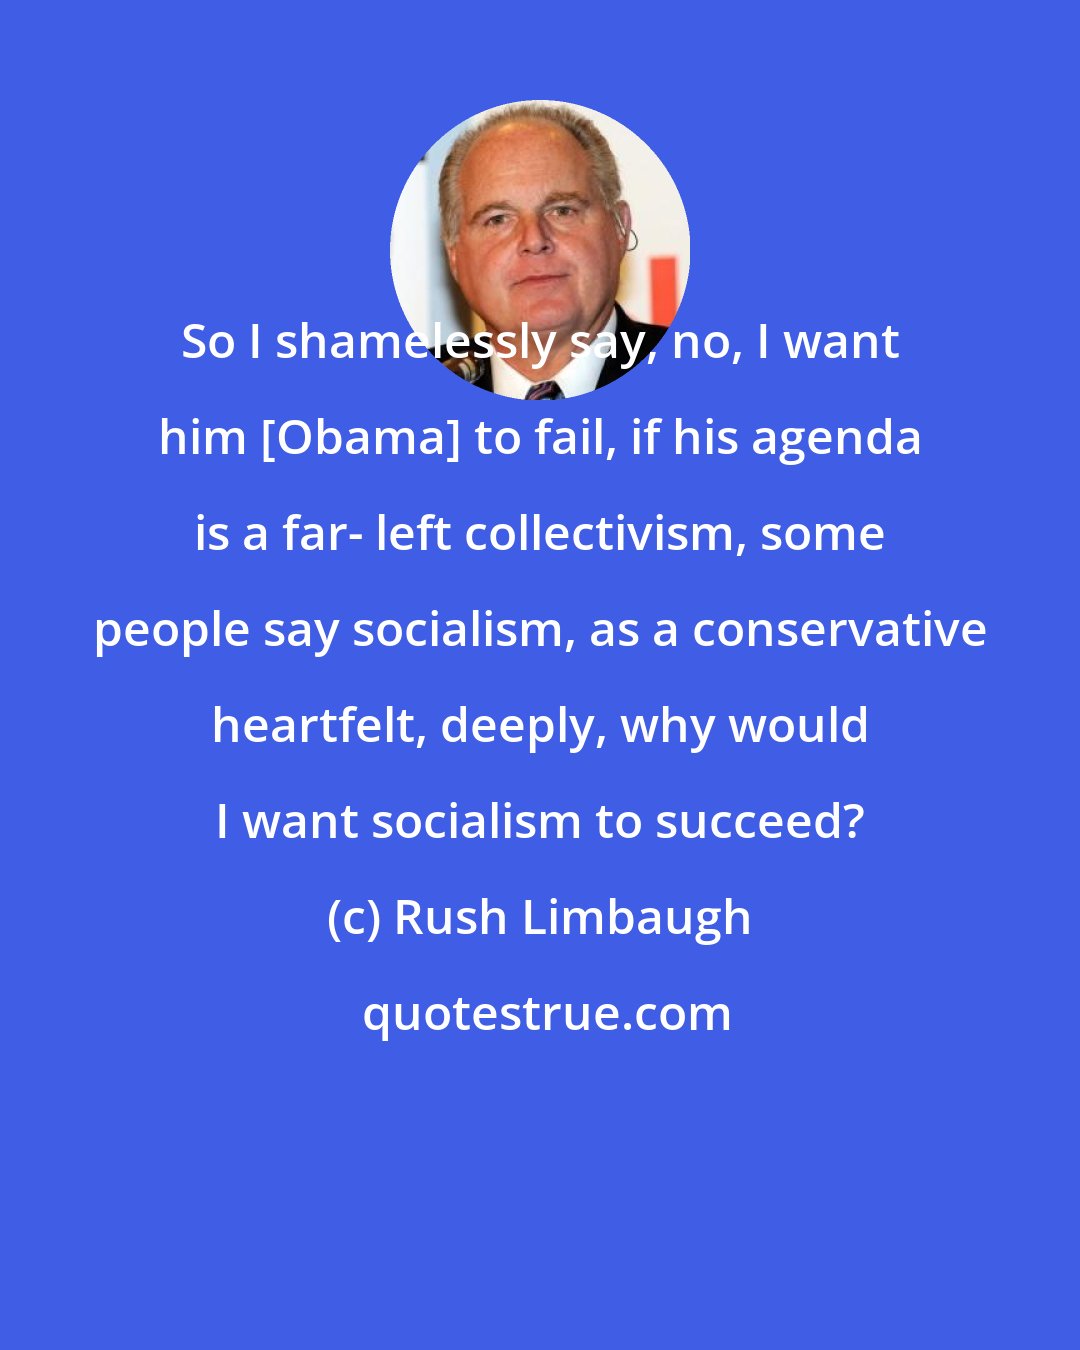 Rush Limbaugh: So I shamelessly say, no, I want him [Obama] to fail, if his agenda is a far- left collectivism, some people say socialism, as a conservative heartfelt, deeply, why would I want socialism to succeed?